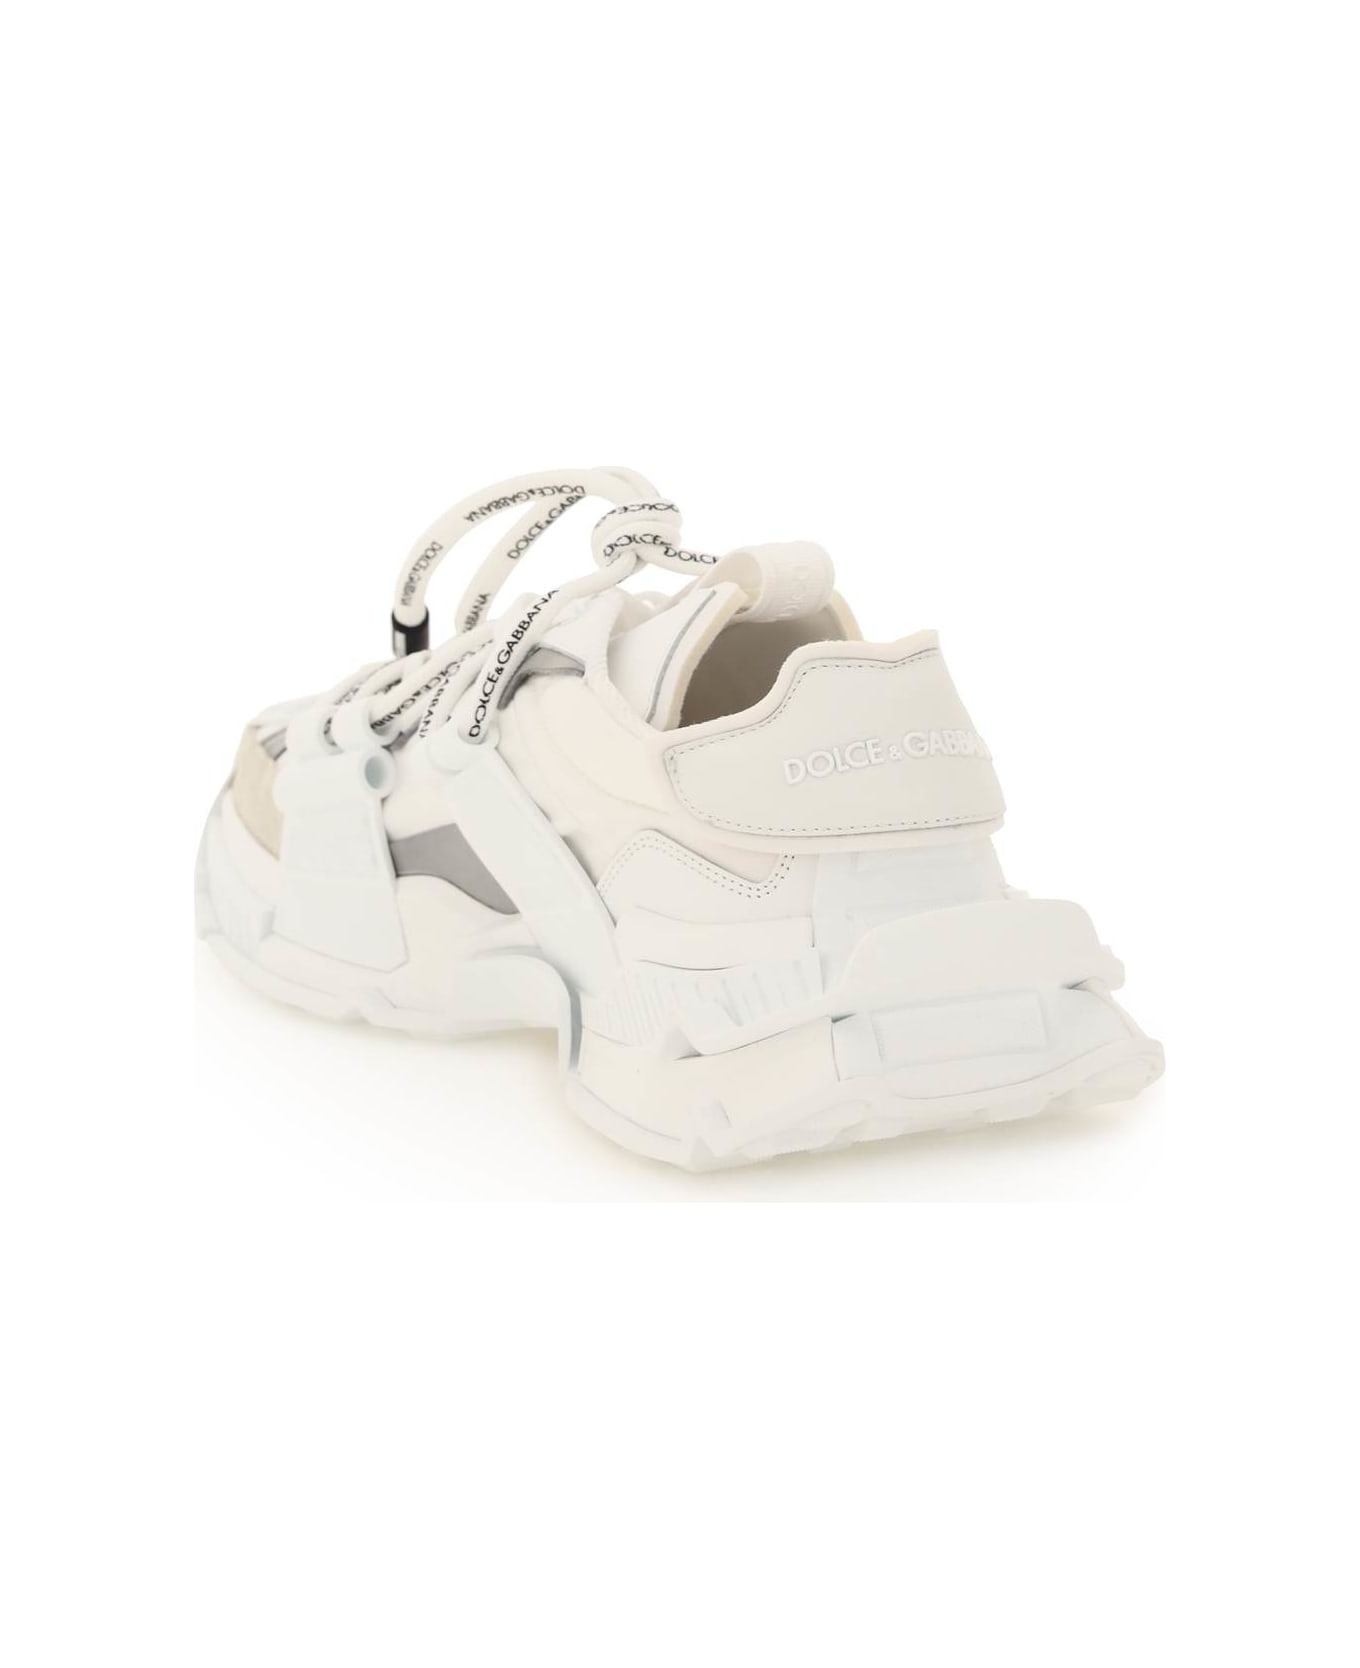 Dolce & Gabbana Multi Material Space Sneakers - WHITE/GREY